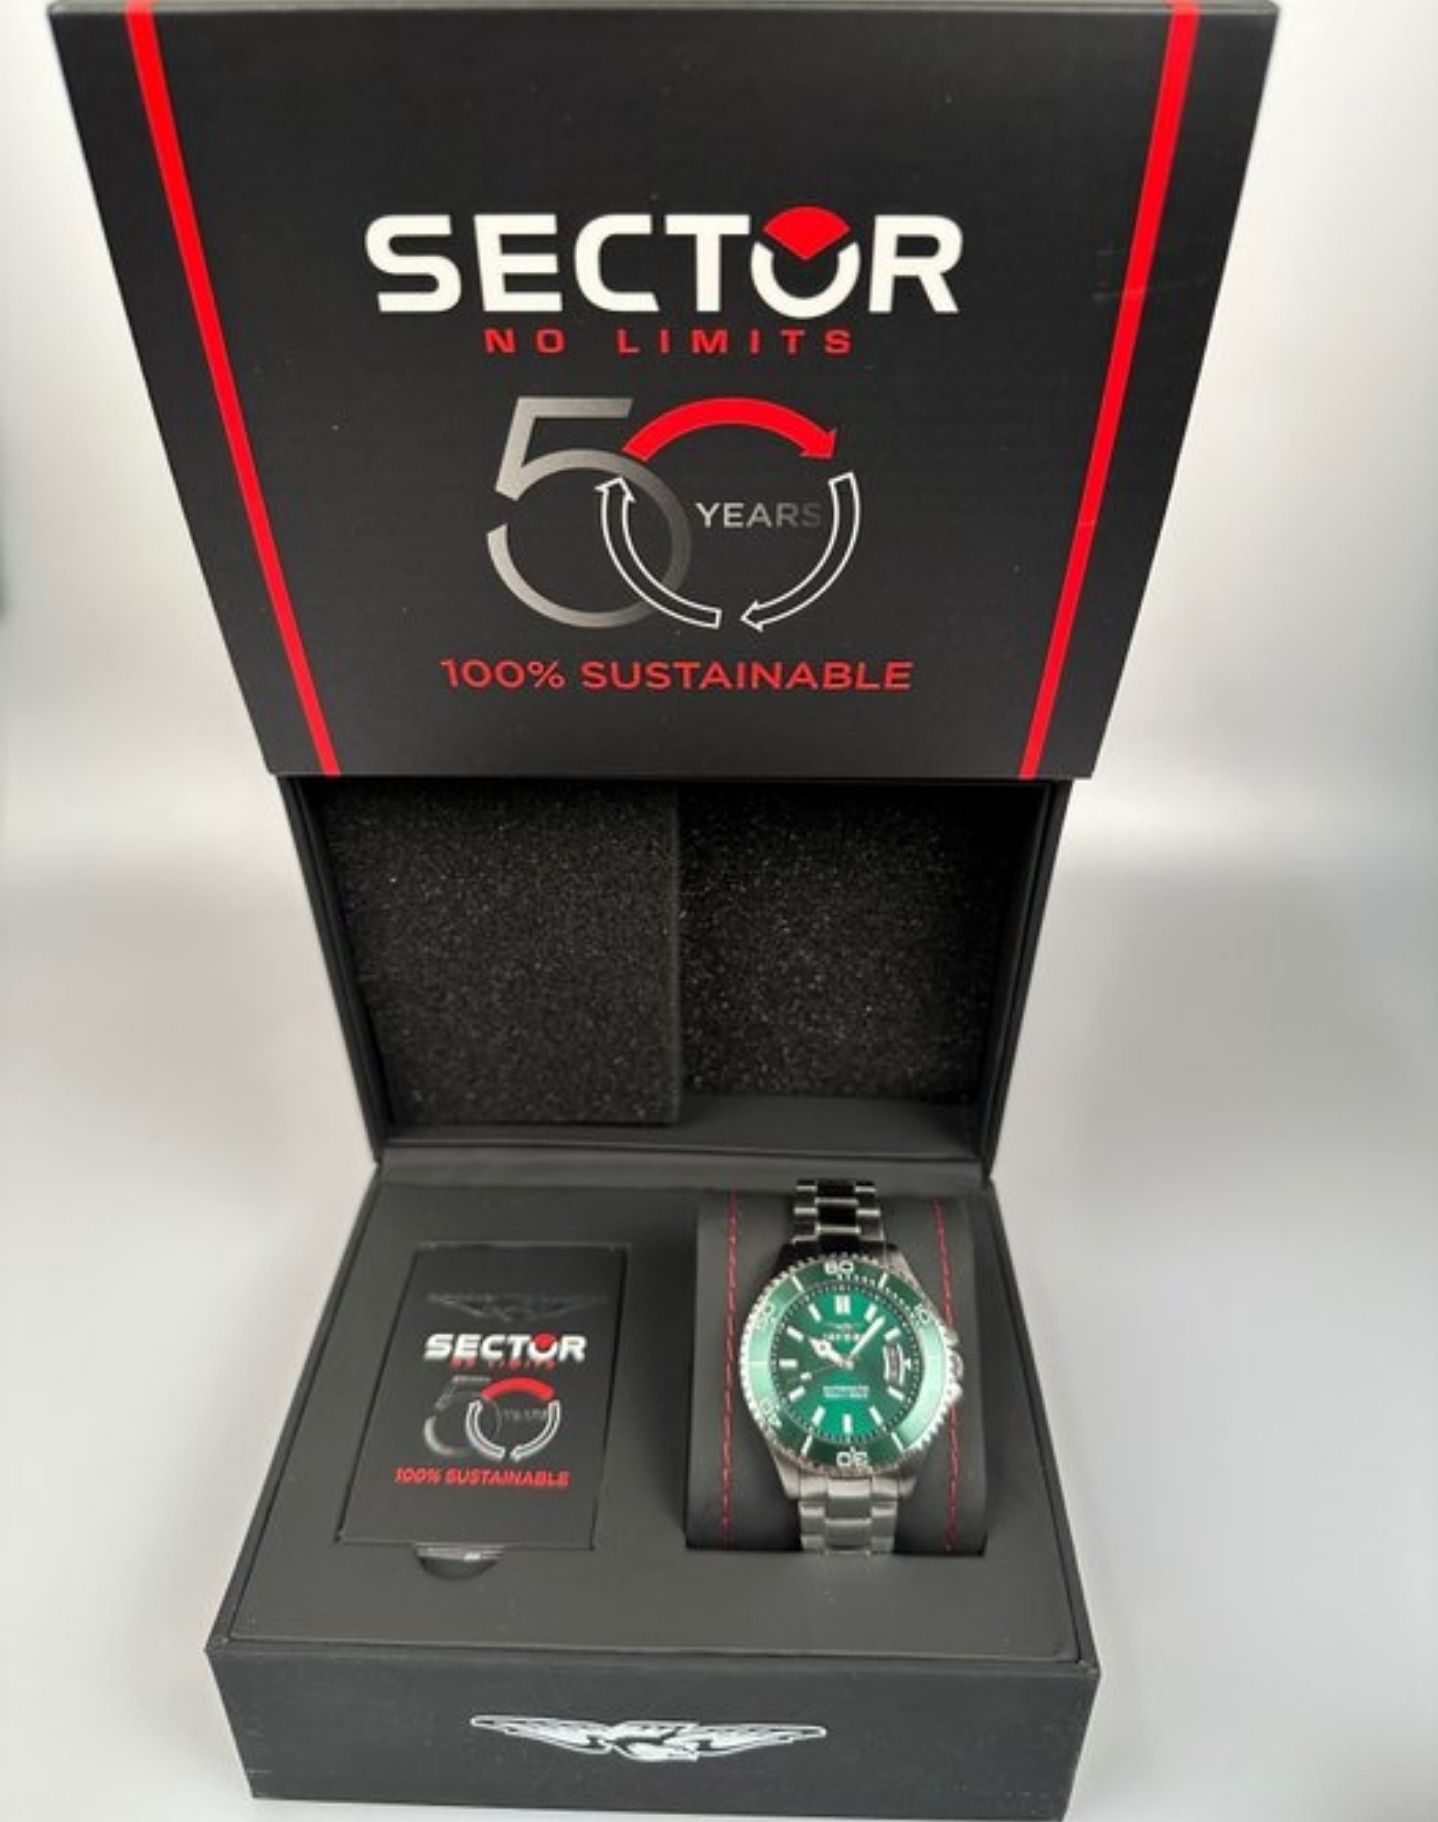 Ceas Sector no limits 50 ani